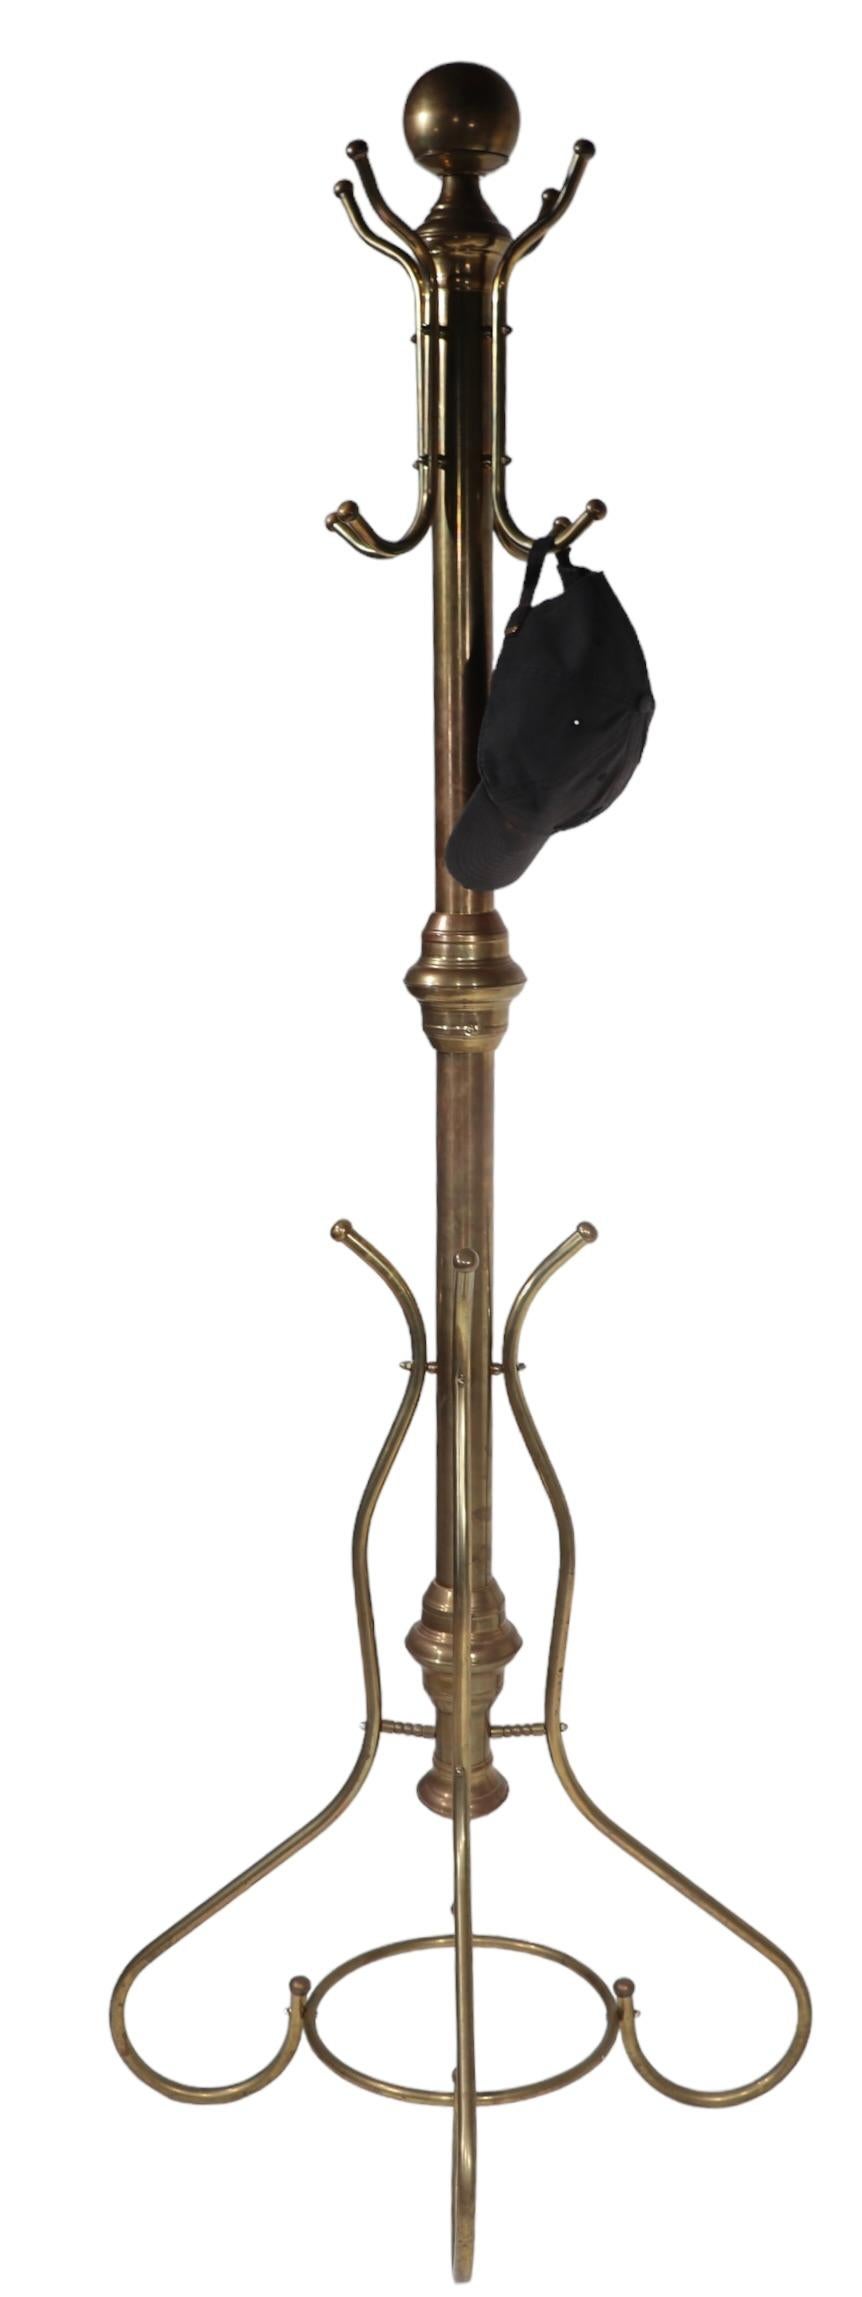 Stylish freestanding  brass coat rack, having four hooks at the top each with an upper peg for coats, and a lower one for scarves, sweaters  etc .
The stand is in very good, original, clean and ready to use condition, showing only light cosmetic